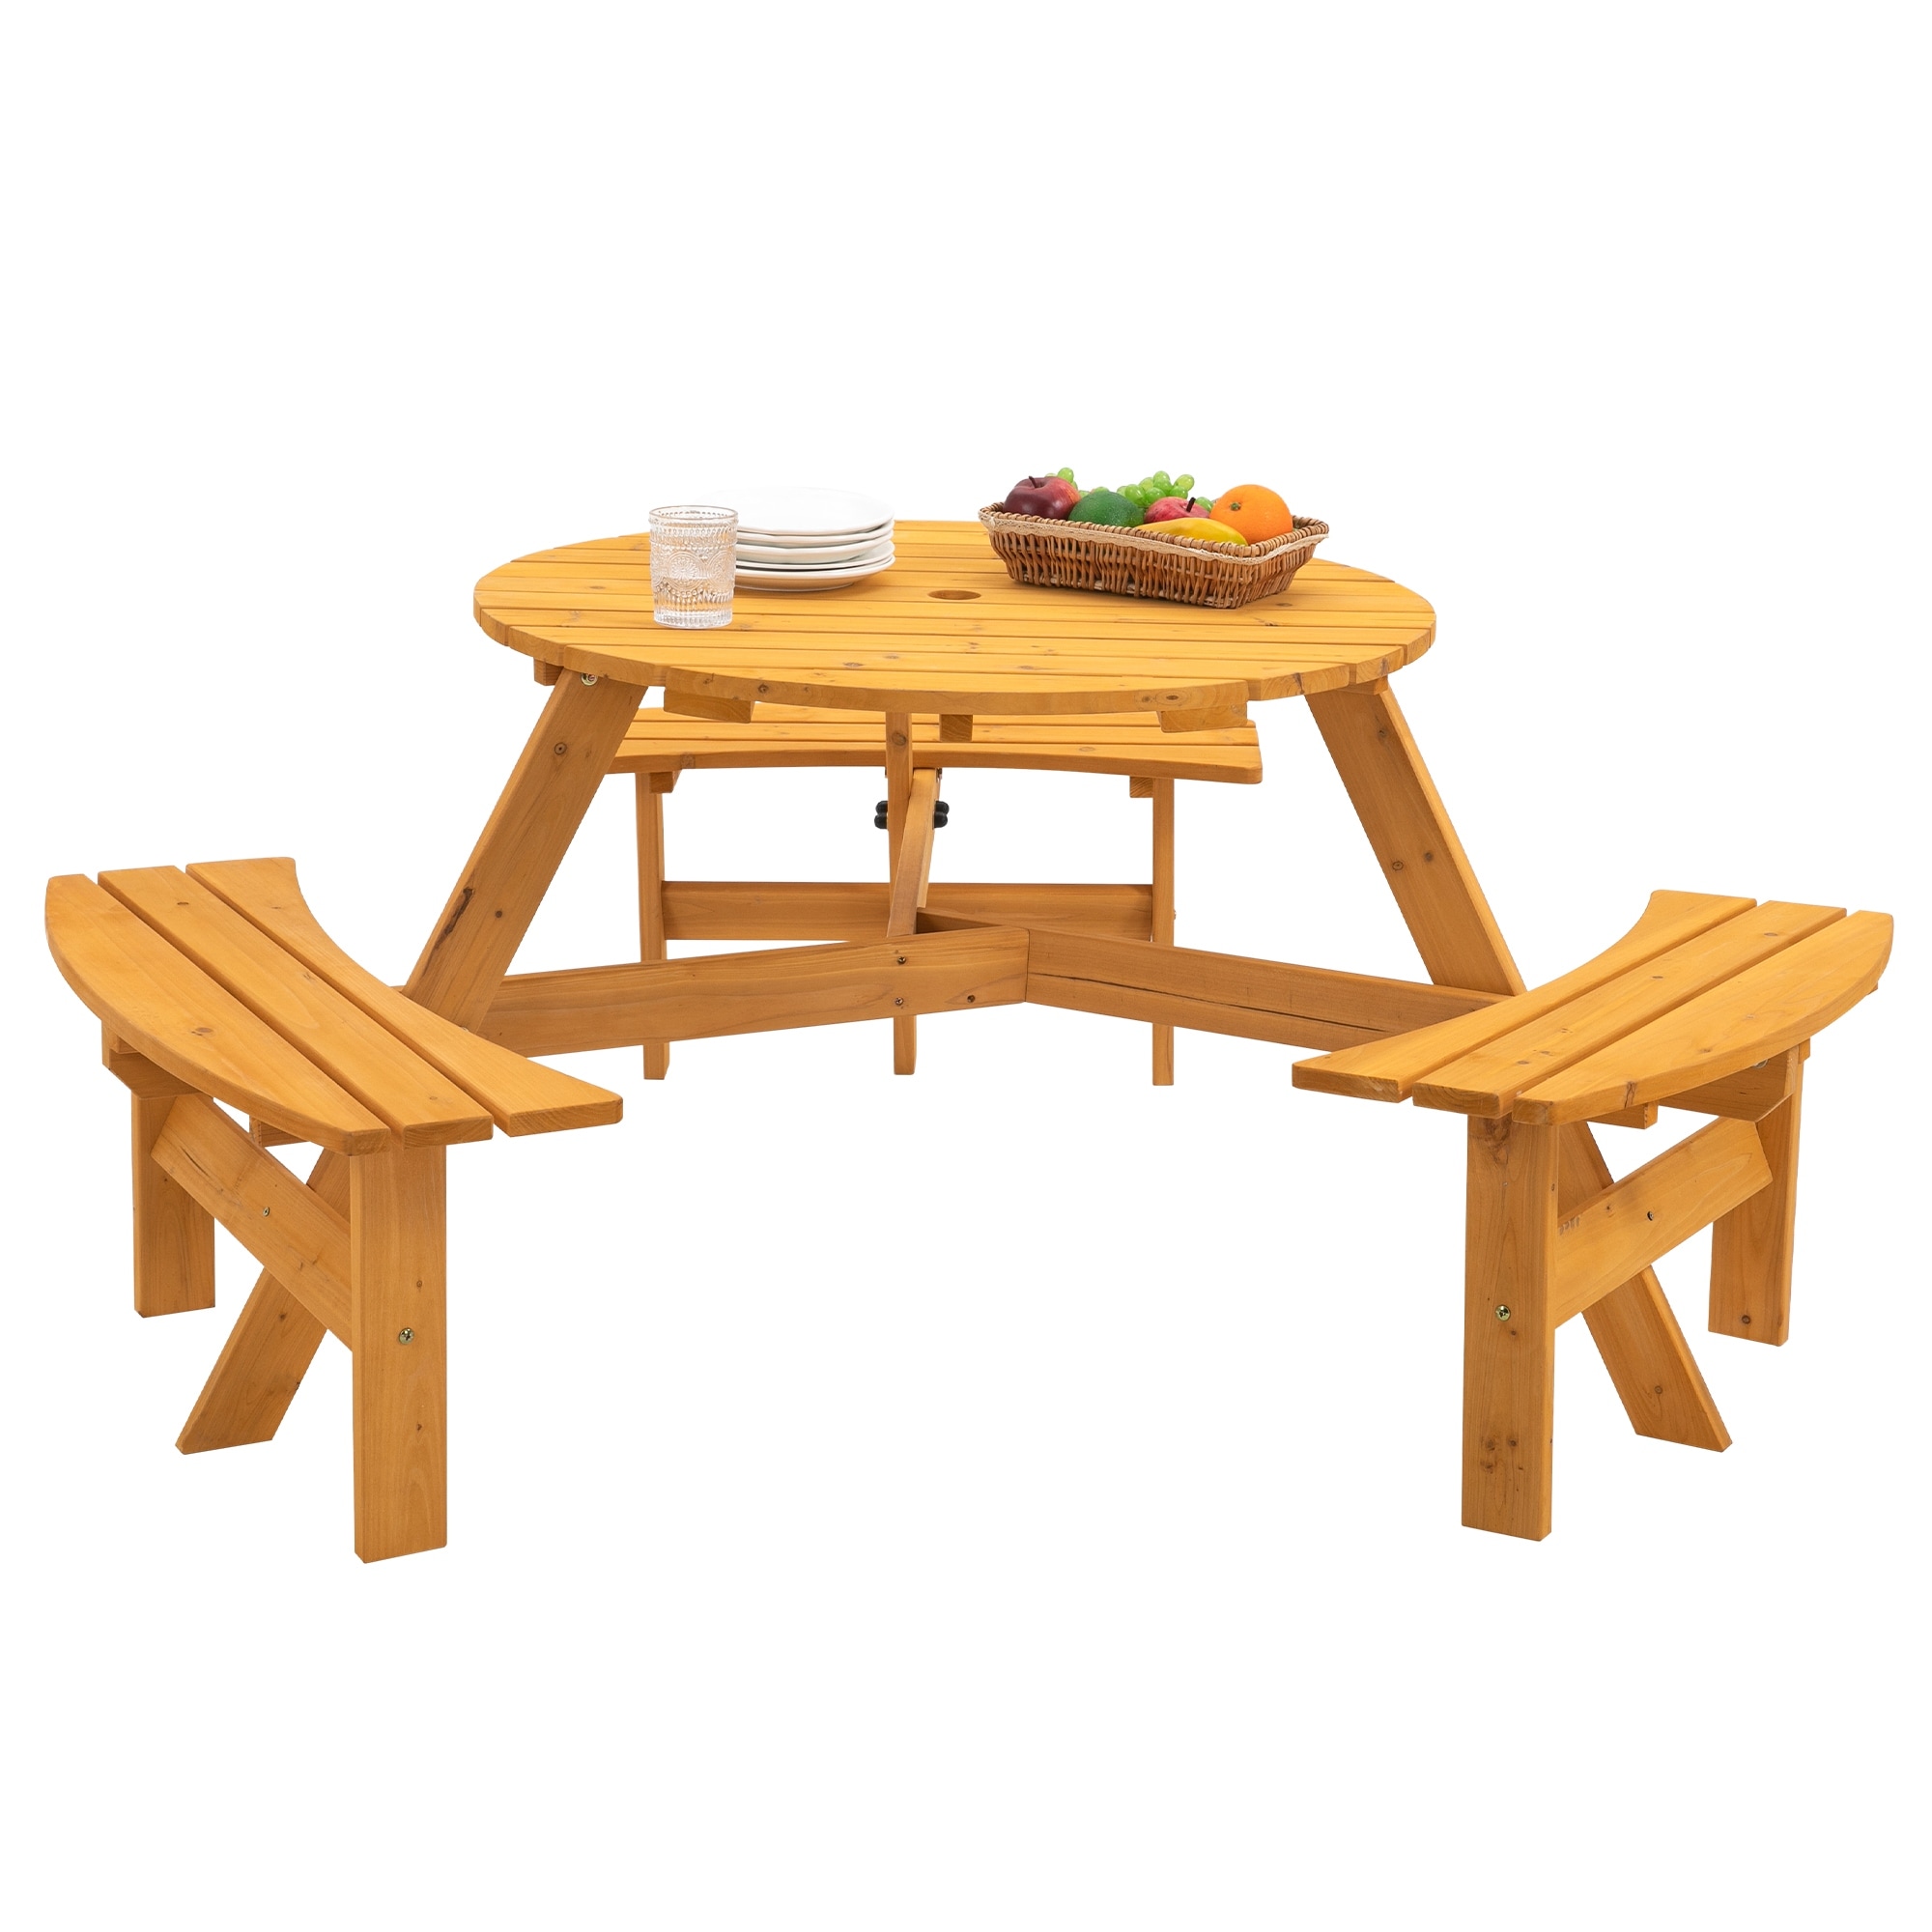 6 Pcs Wooden Picnic Tables Dining Sets Lounge Dining With Round Dining Table And 3 Built-in Curved Benches And Umbrella Hole